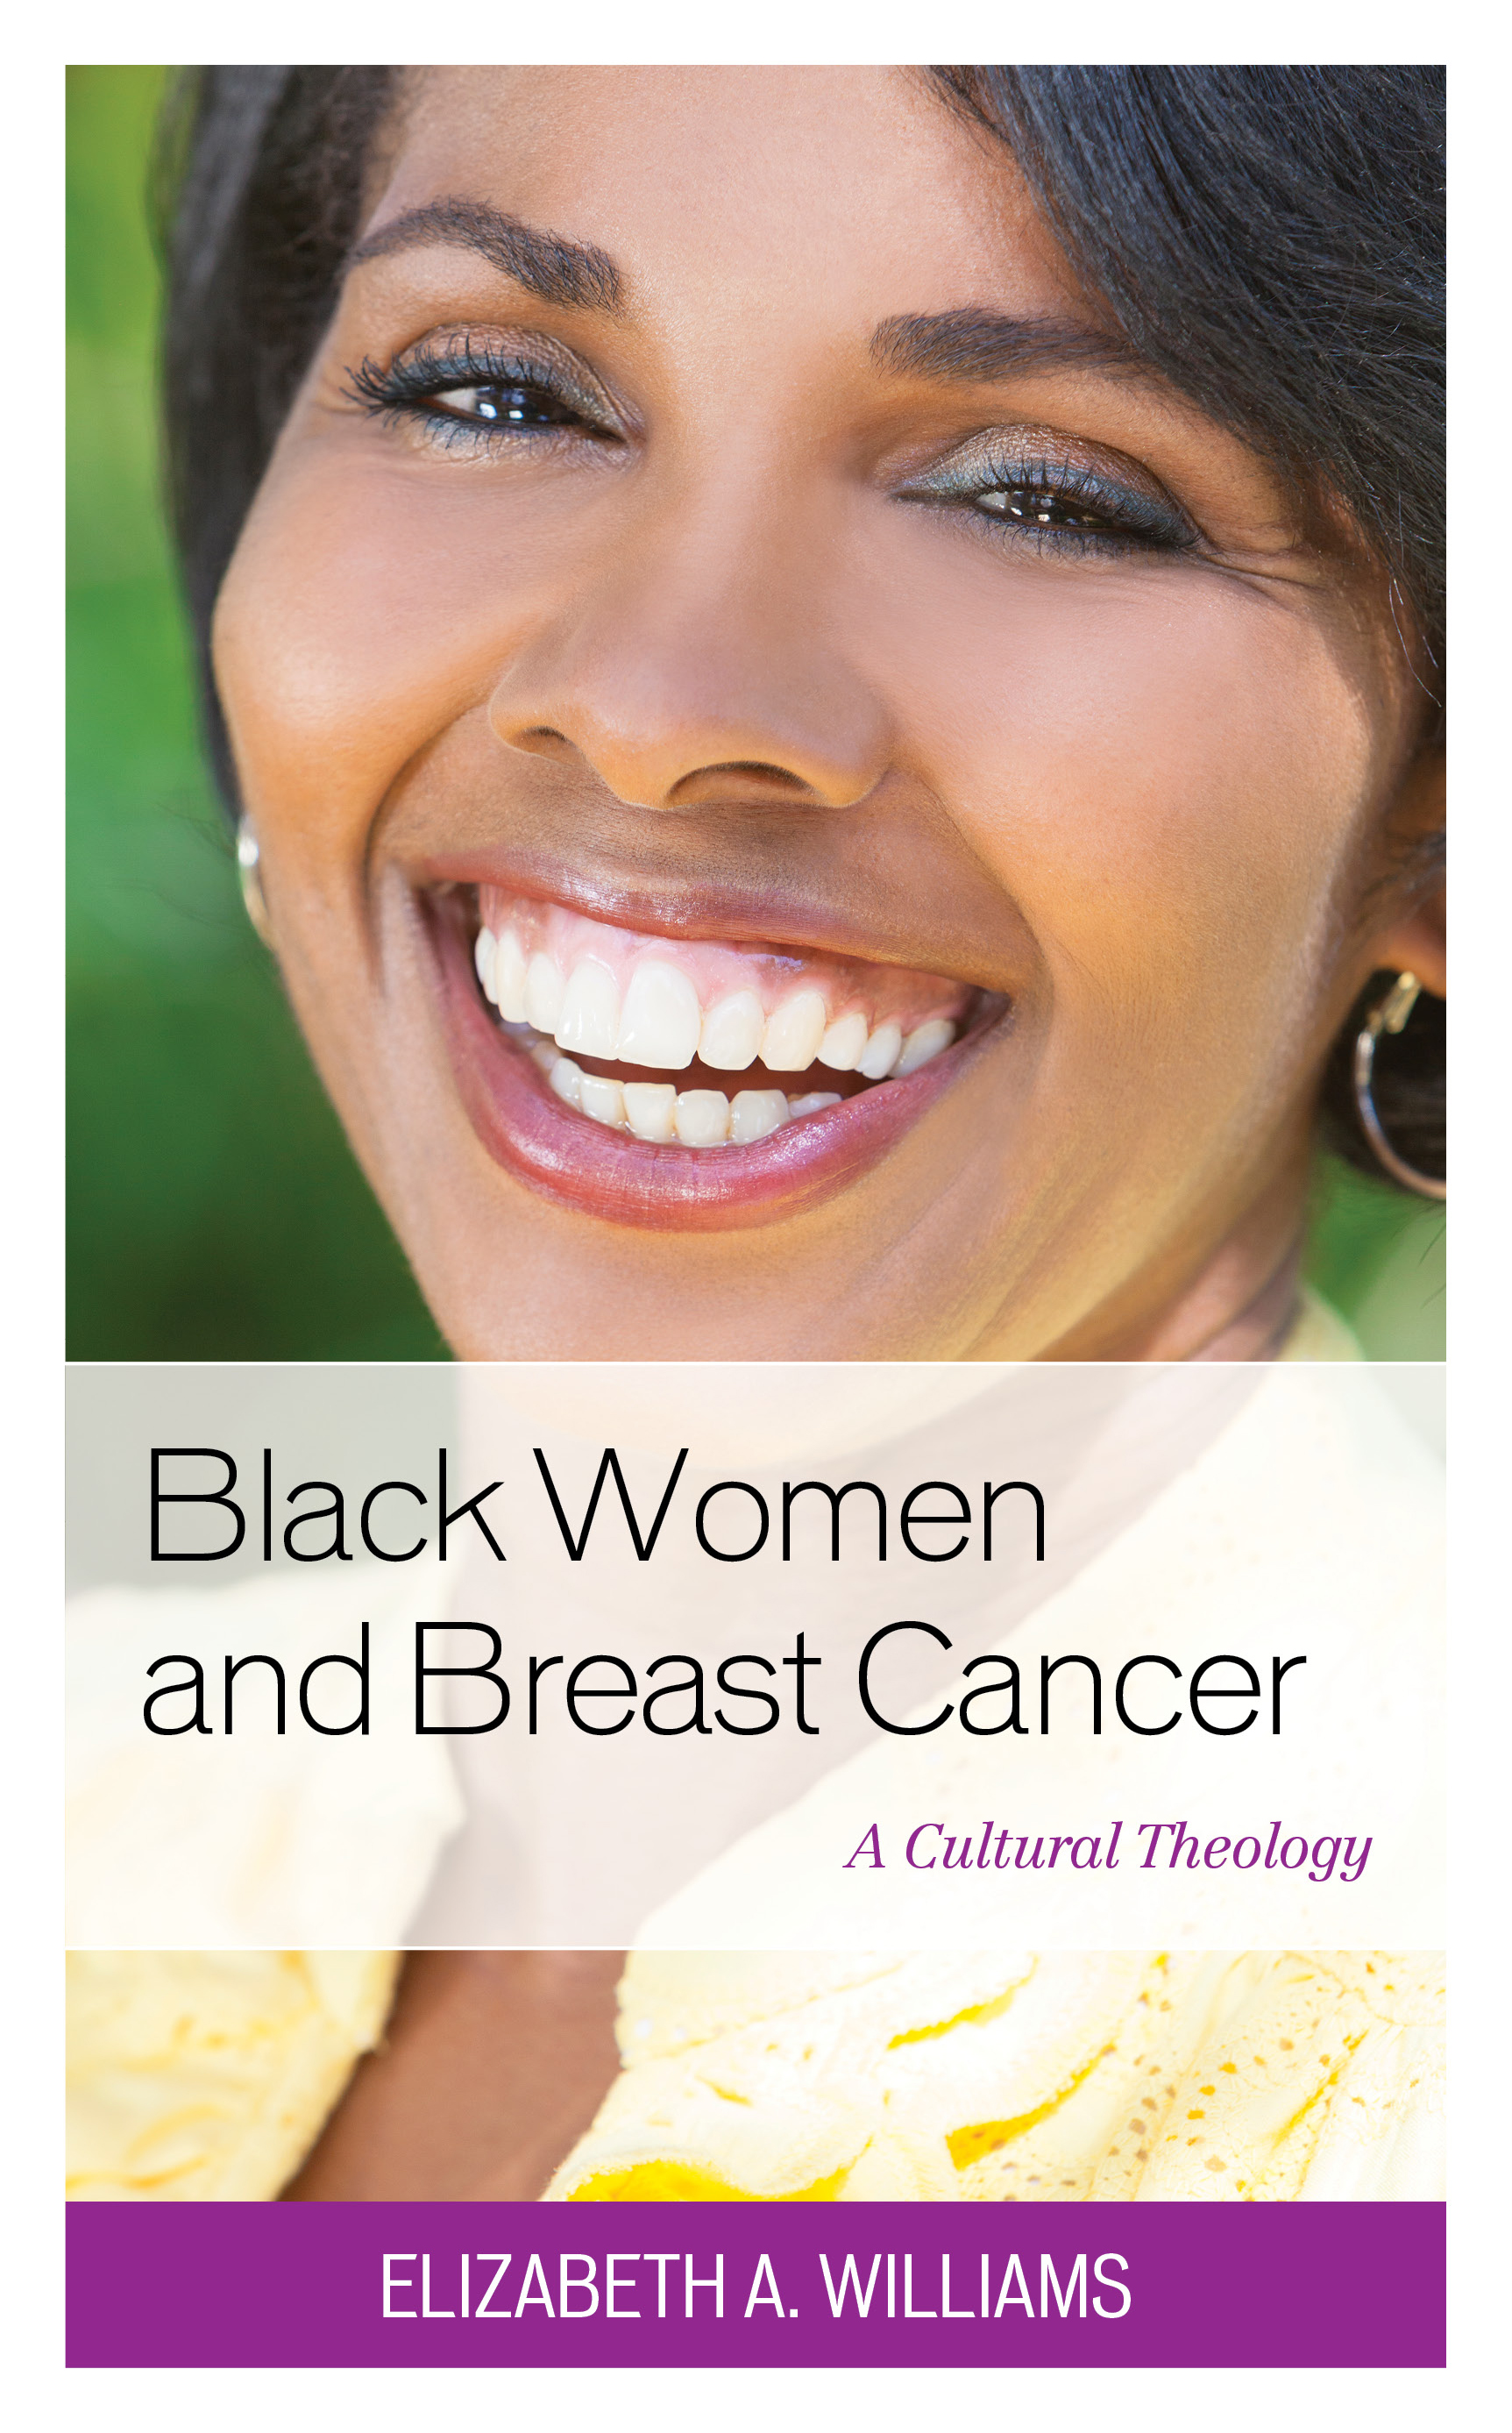 Black Women and Breast Cancer: A Cultural Theology